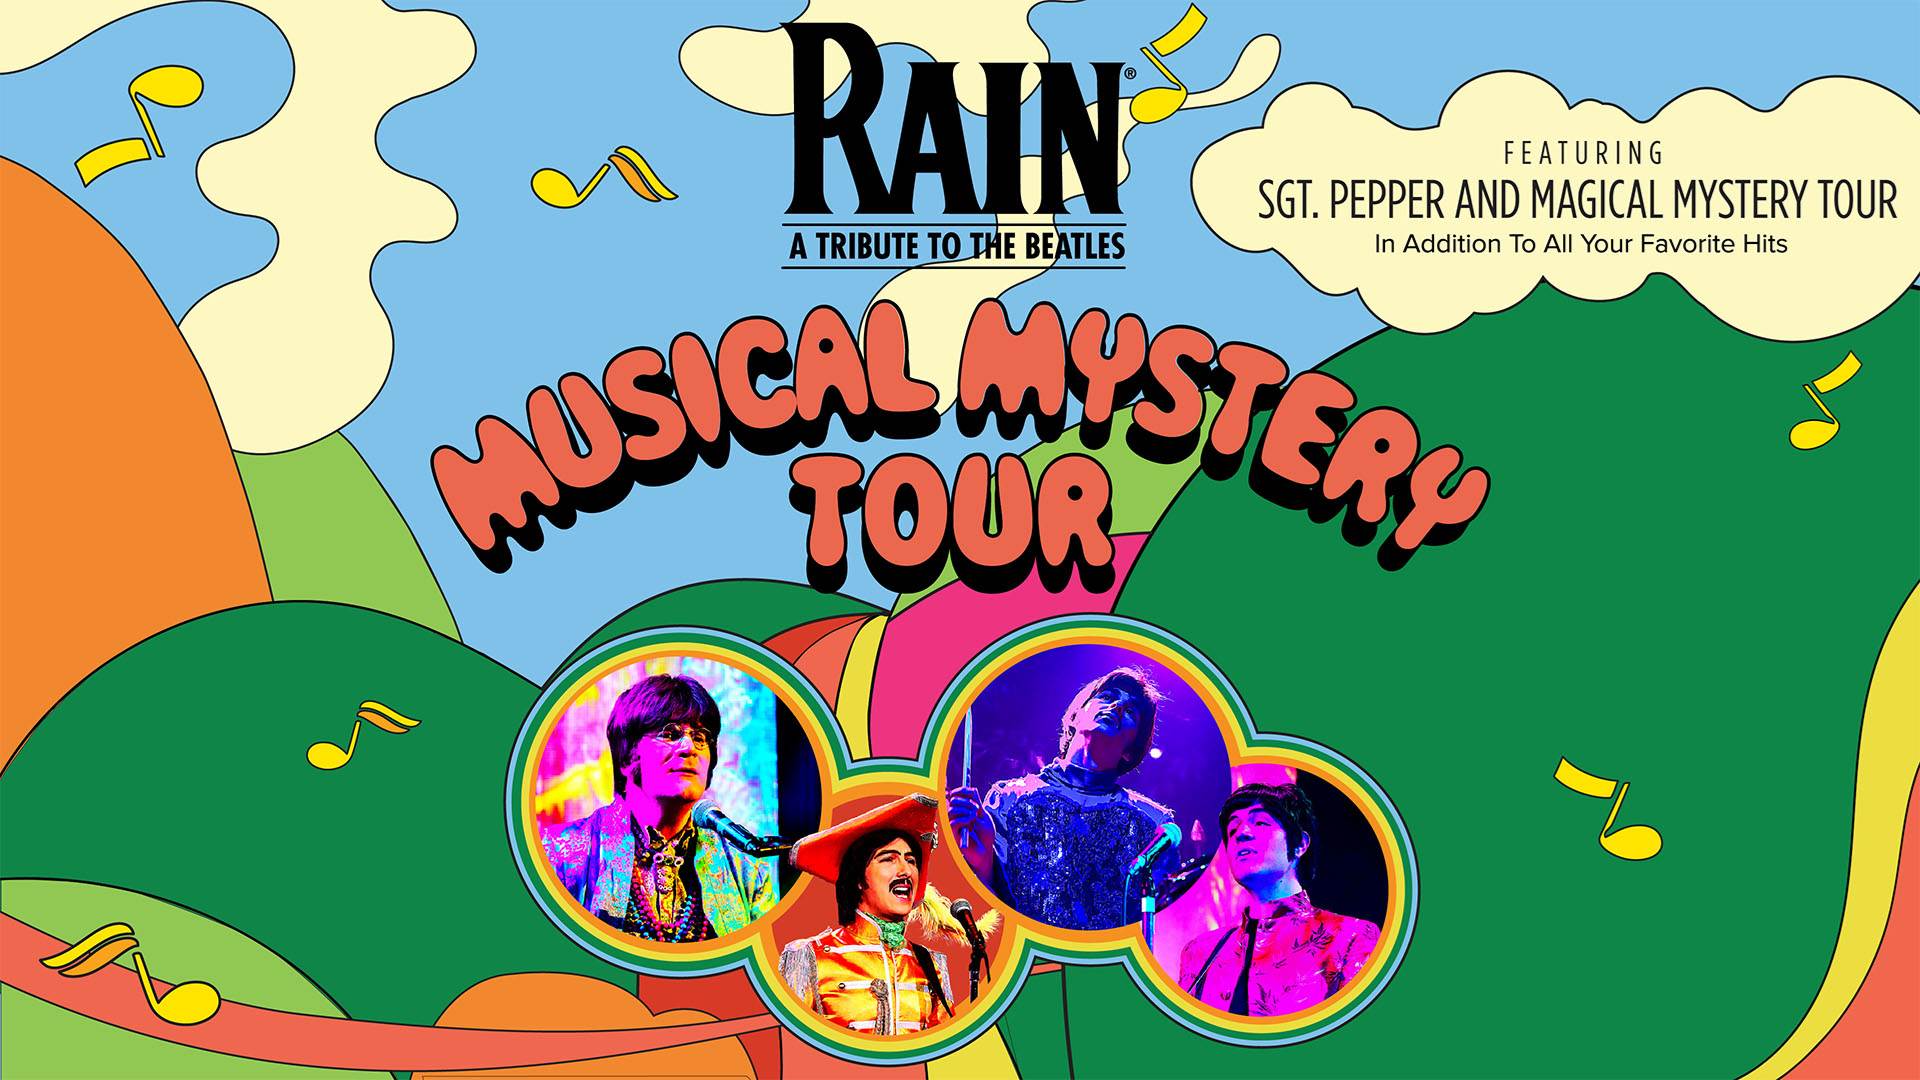 Banner text reads: "RAIN A Tribute to the Beatles Musical Mystery Tour Featuring SGT. Pepper and Magical Mystery Tour in Addition to All Your Favorite Hits. Four performers dressed like the beatles in colorful clothing are shown agains a colorful psychadelic background of hills and sky.